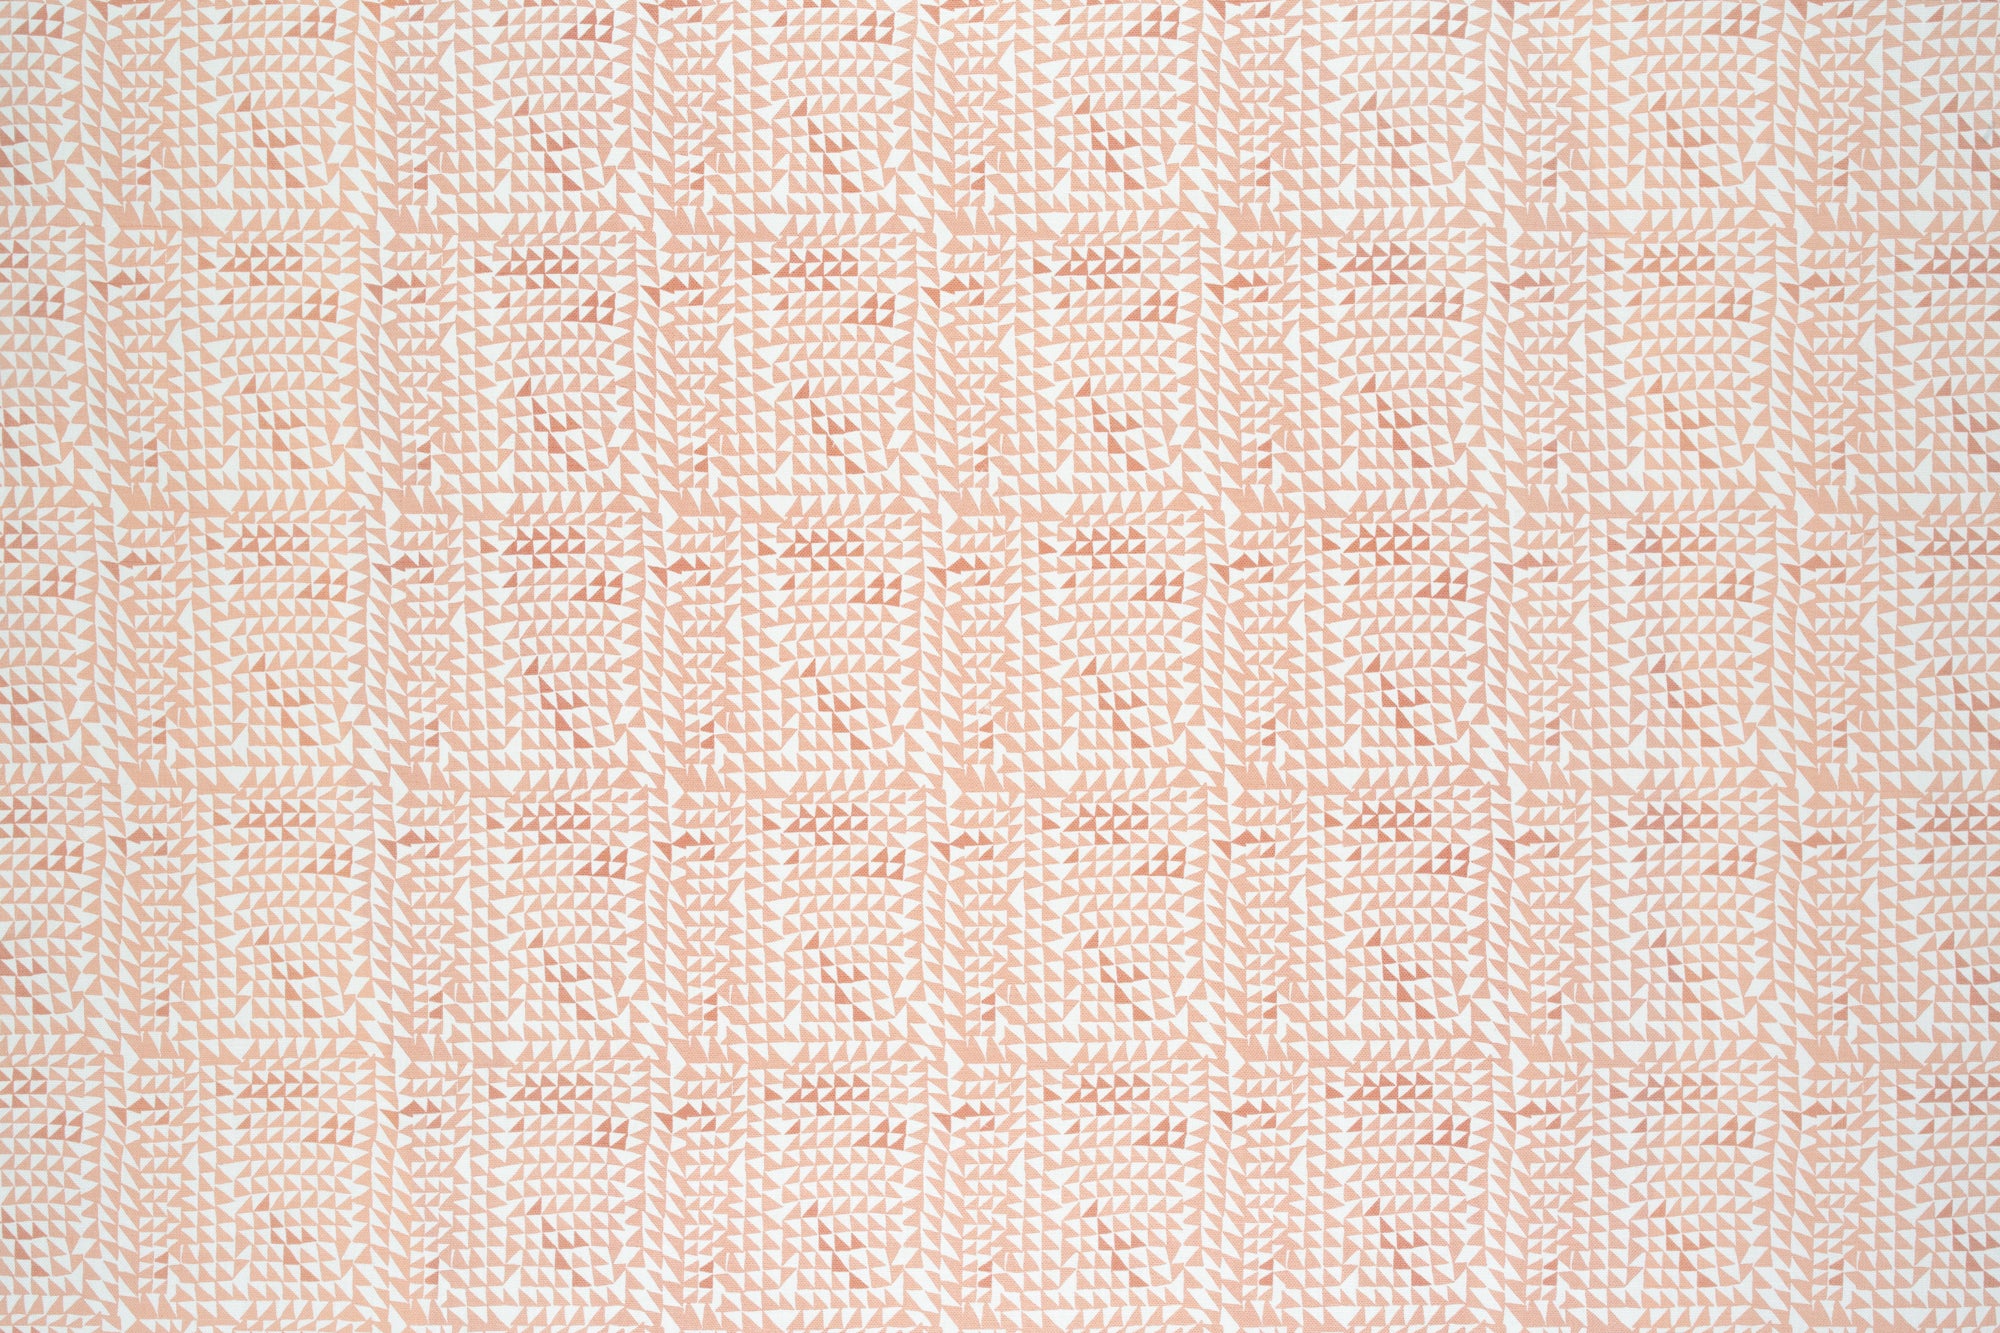 Detail of fabric in a dense triangle grid print in shades of pink and coral on a white field.